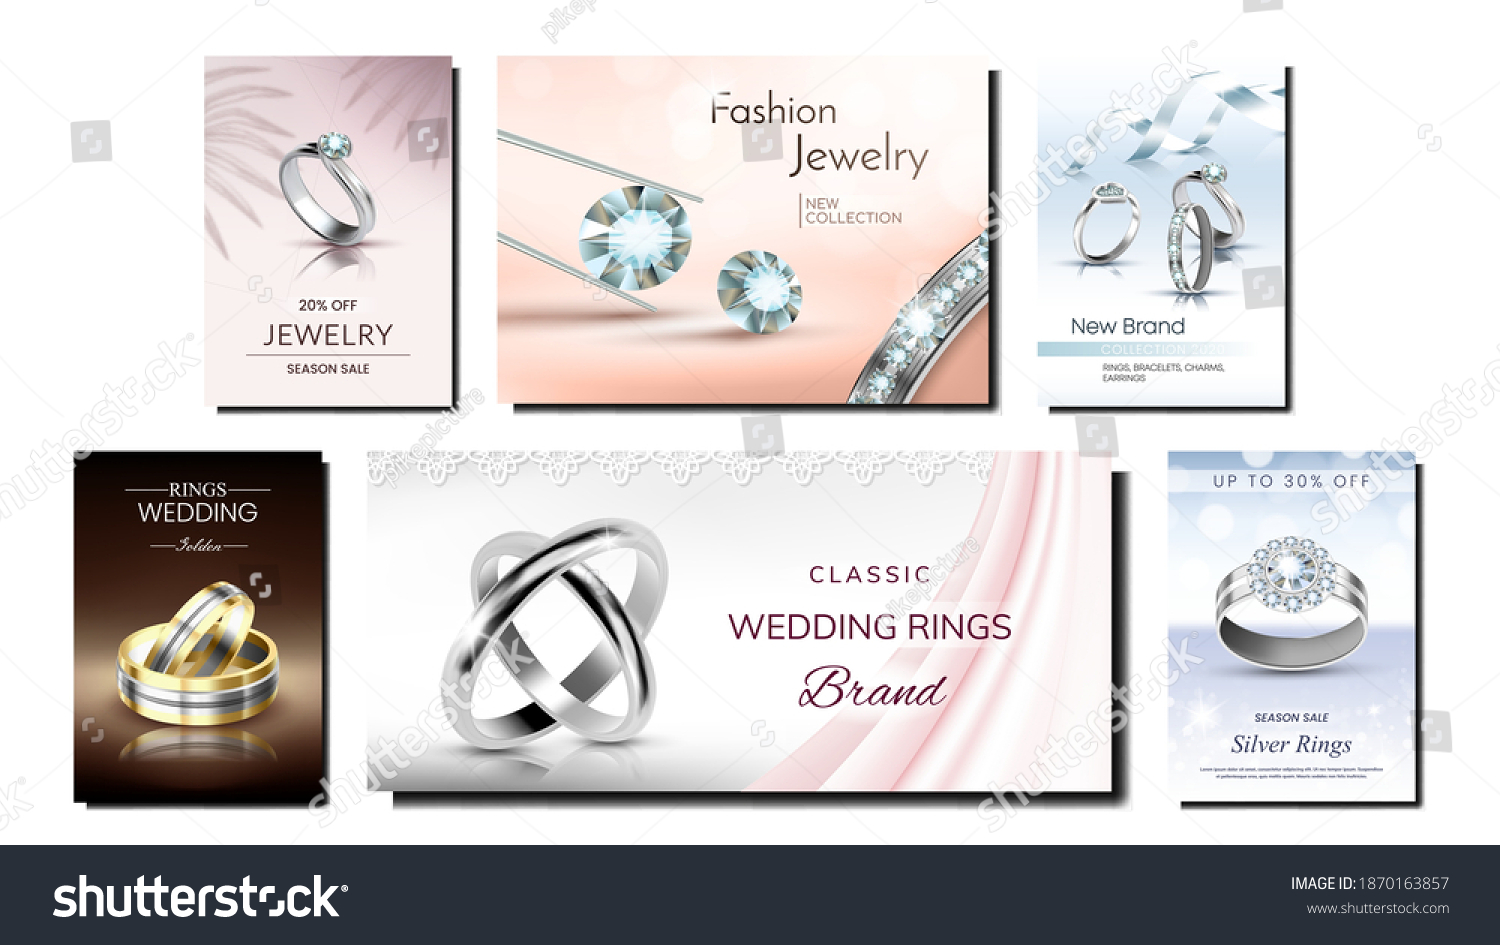 Jewelry Creative Promotional Posters Set Vector. Fashion Jewelry Golden And Silver Rings And Gemstones, Diamond And Brilliants On Advertising Banners. Style Concept Template Illustrations #1870163857